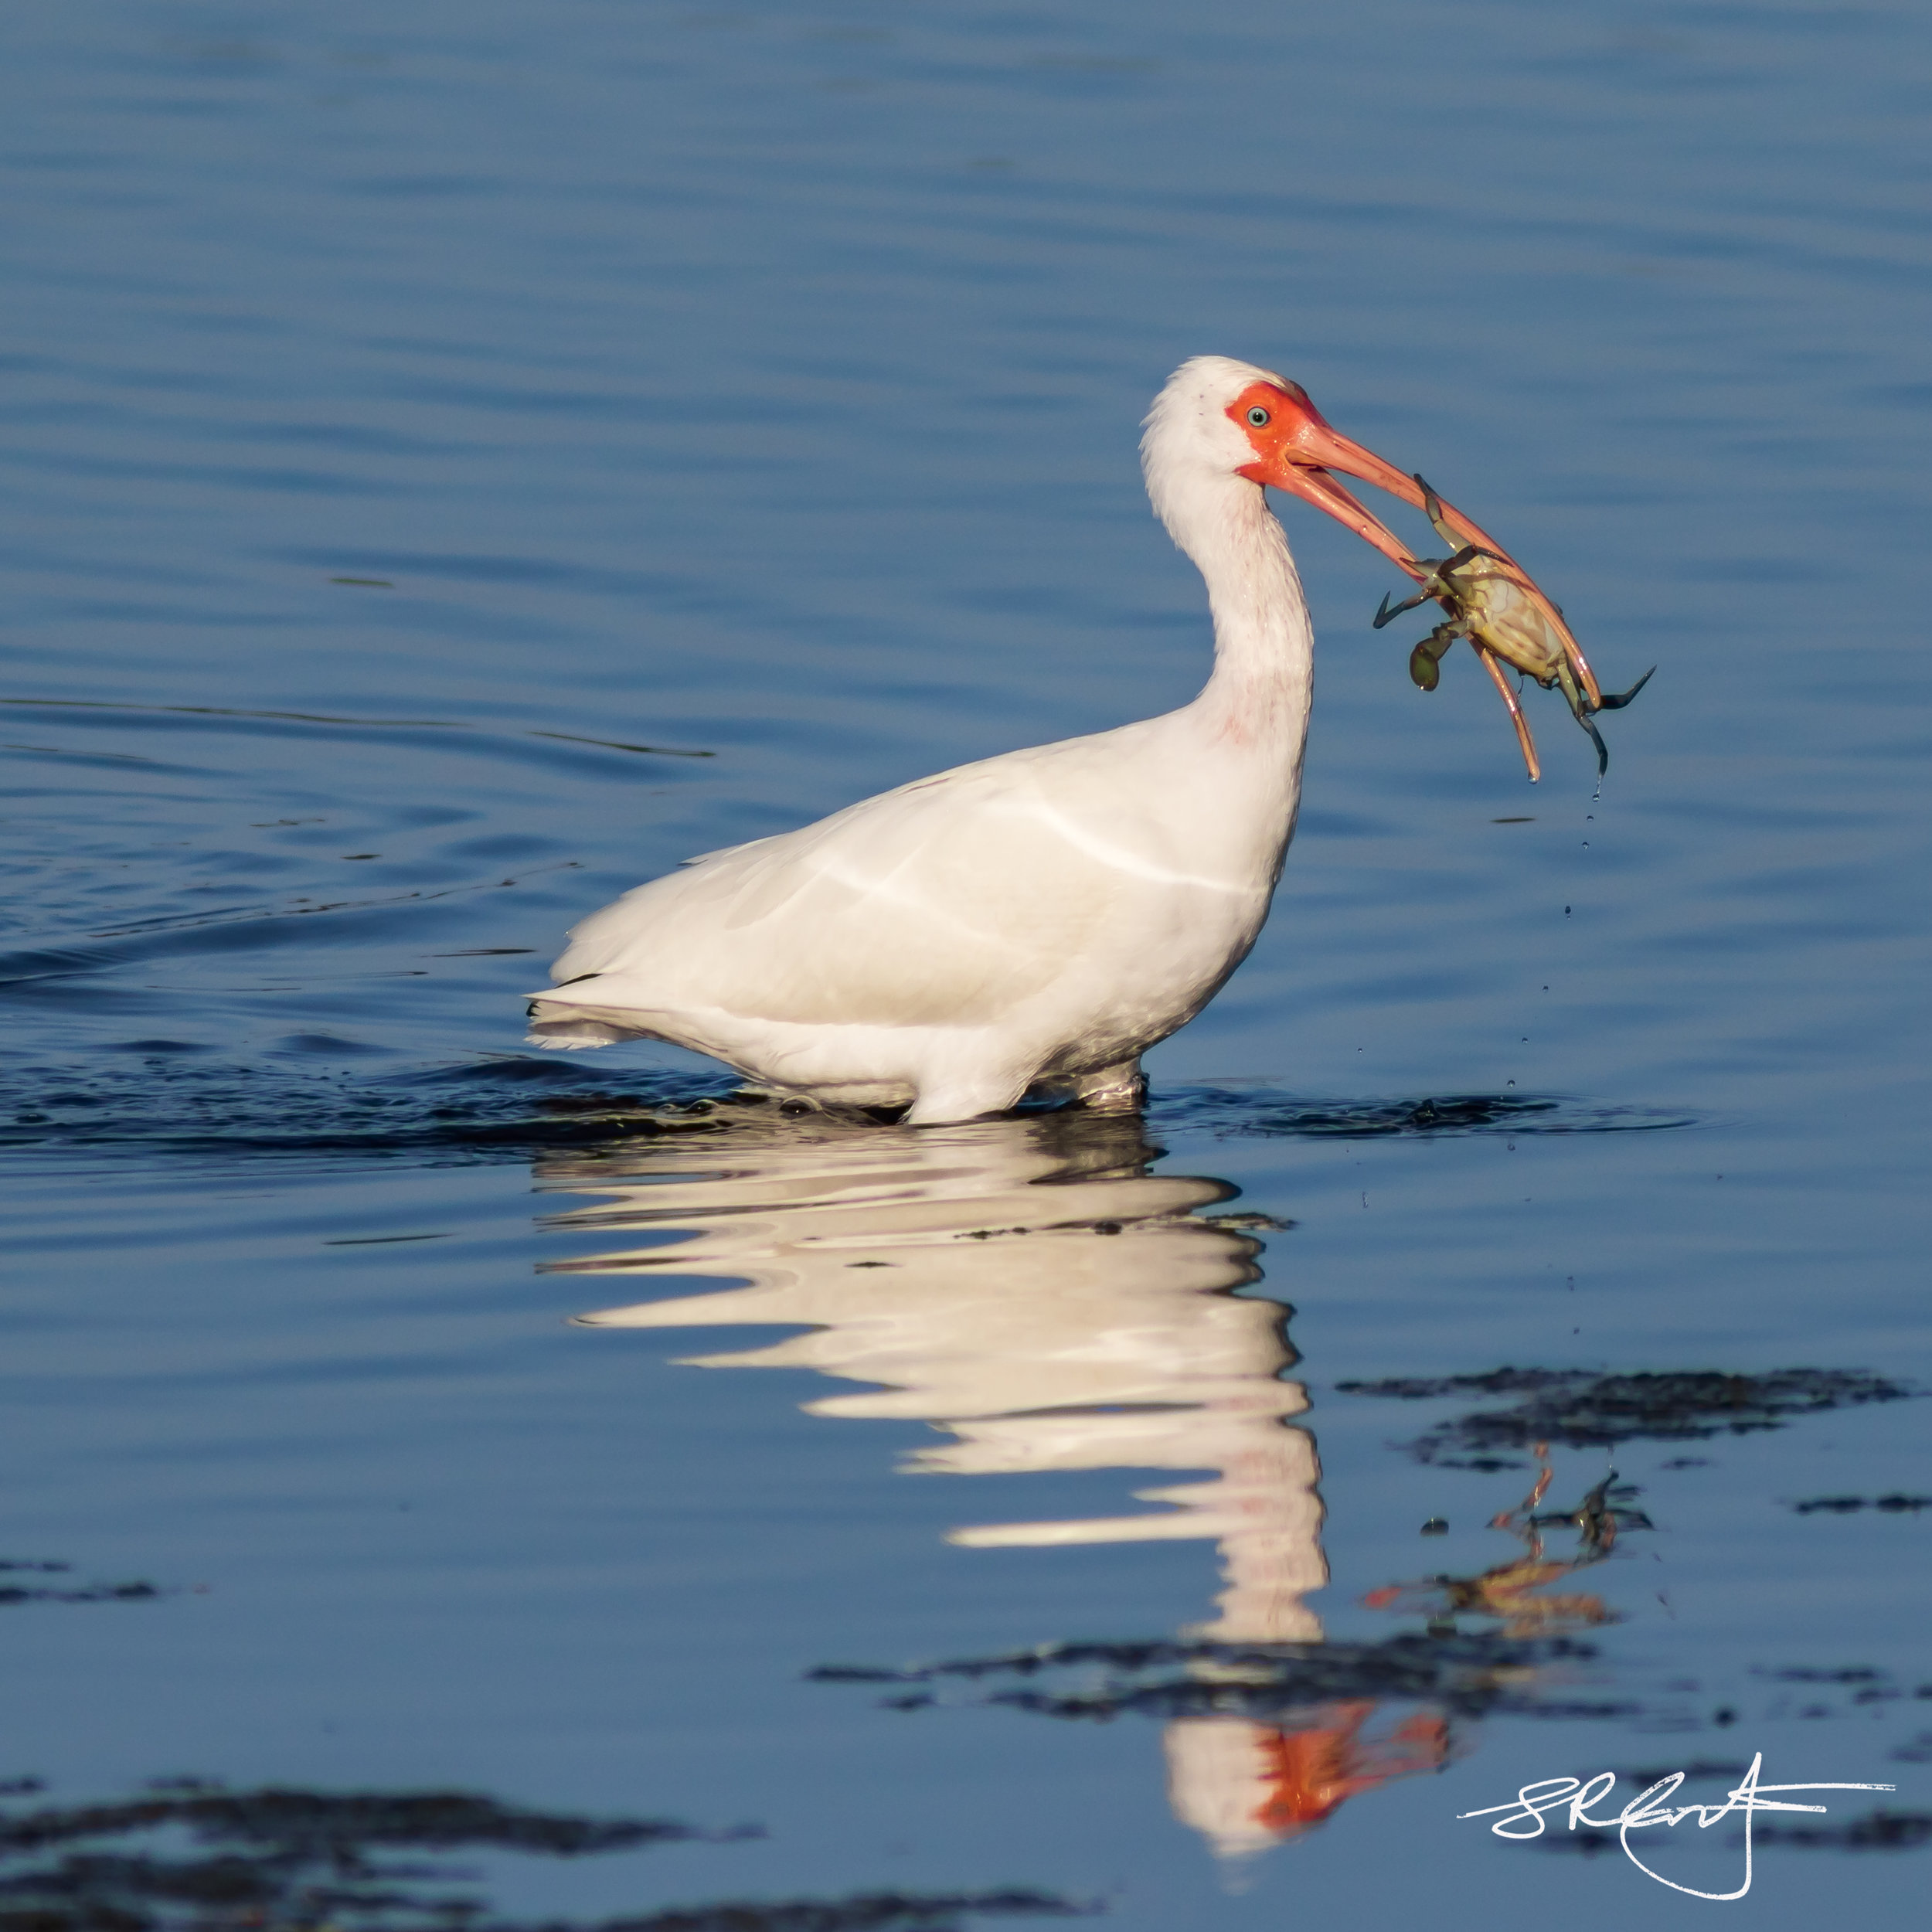 White Ibis with Crab